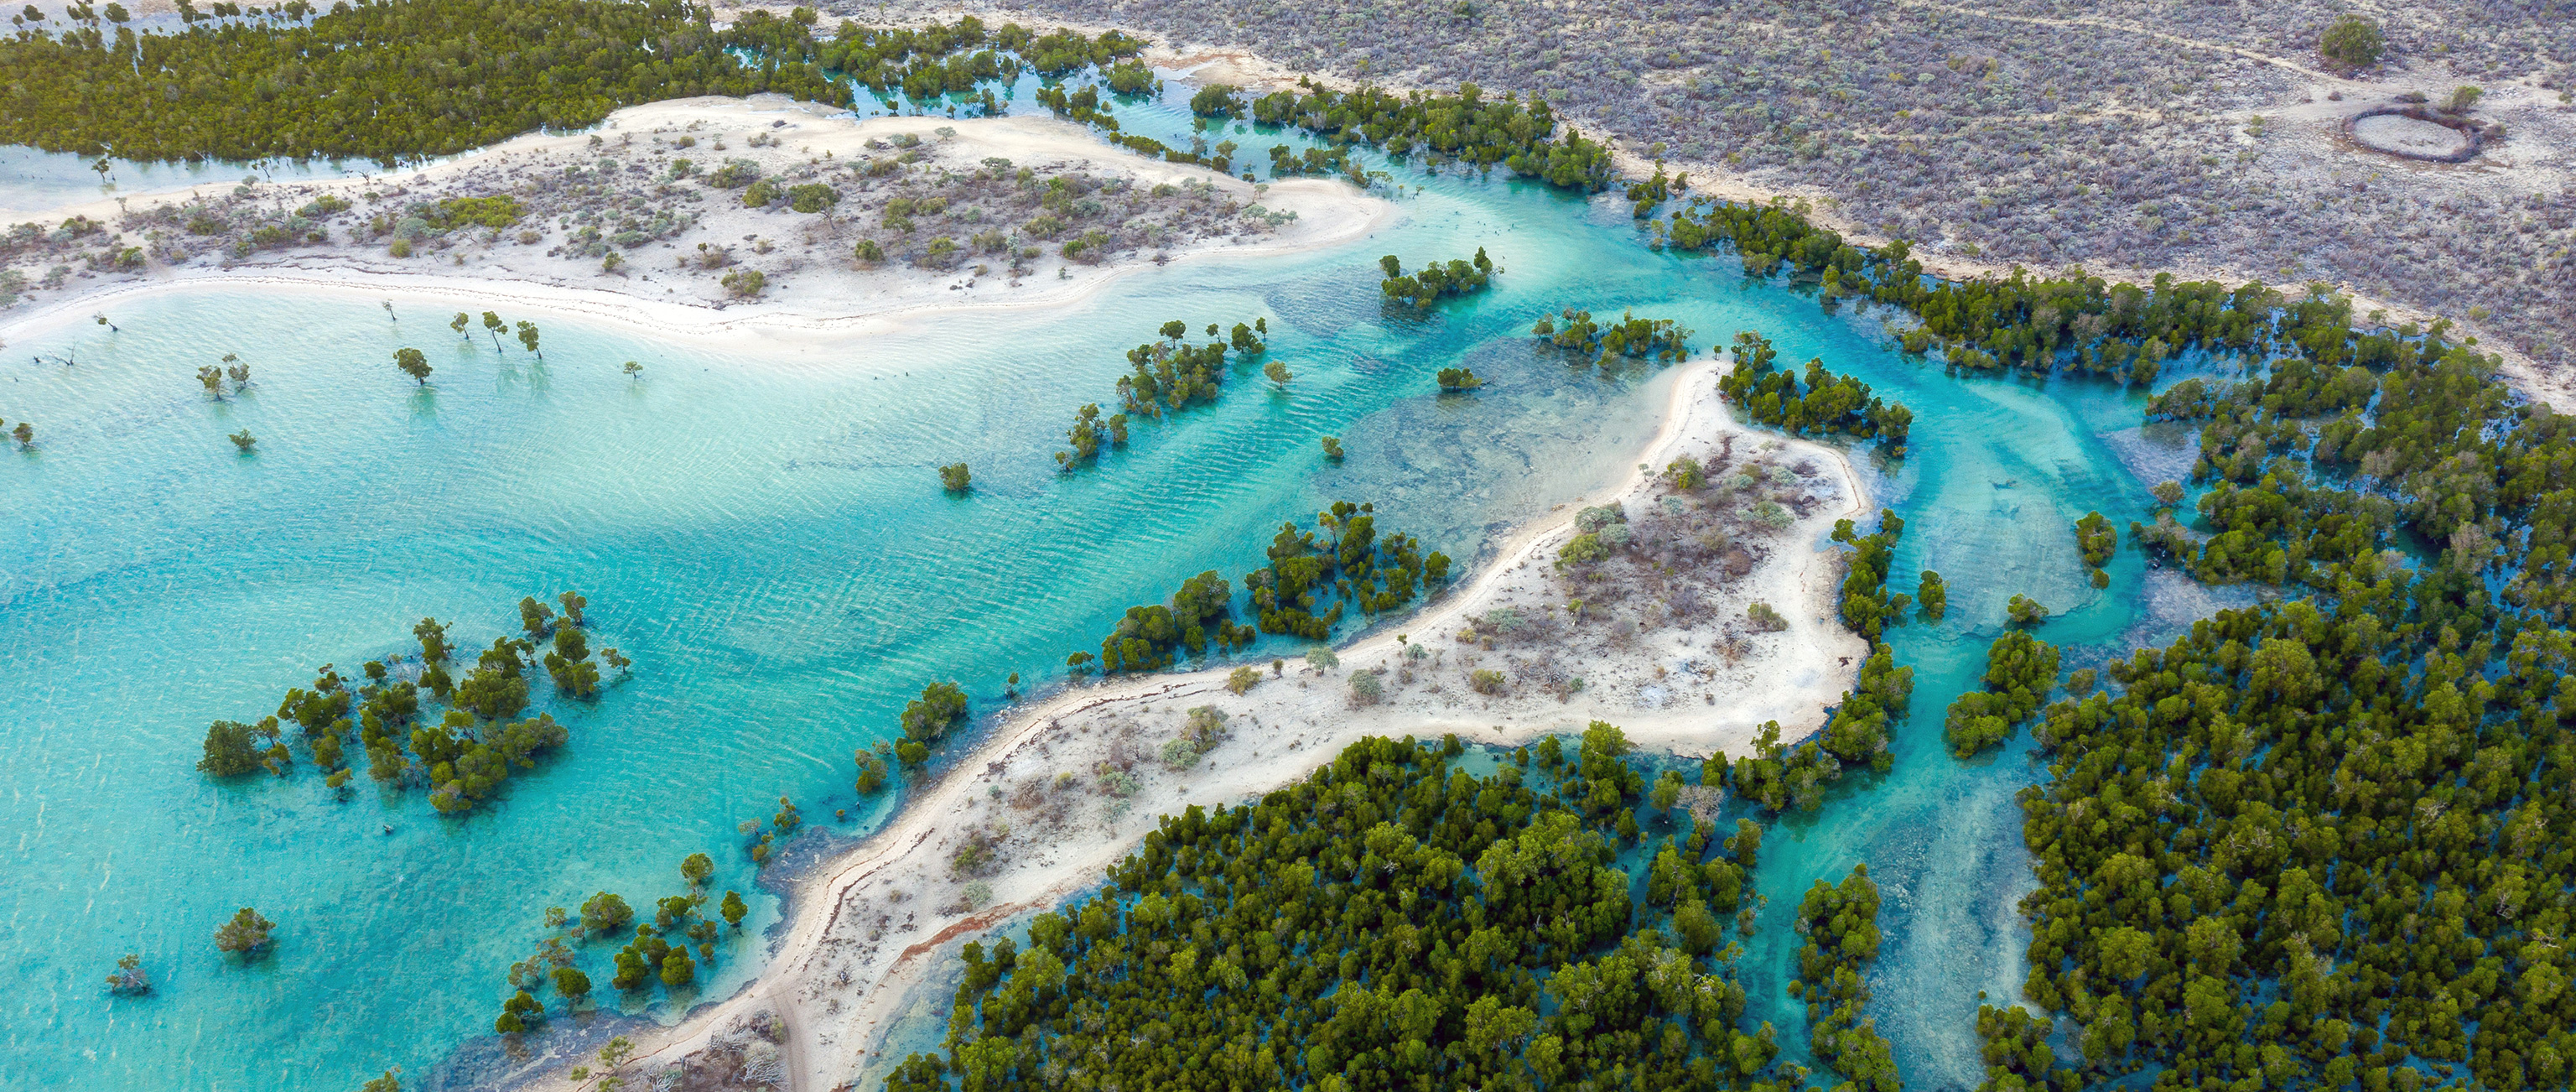 Blue Carbon: A Pioneering Mangrove Conservation Project in Madagascar